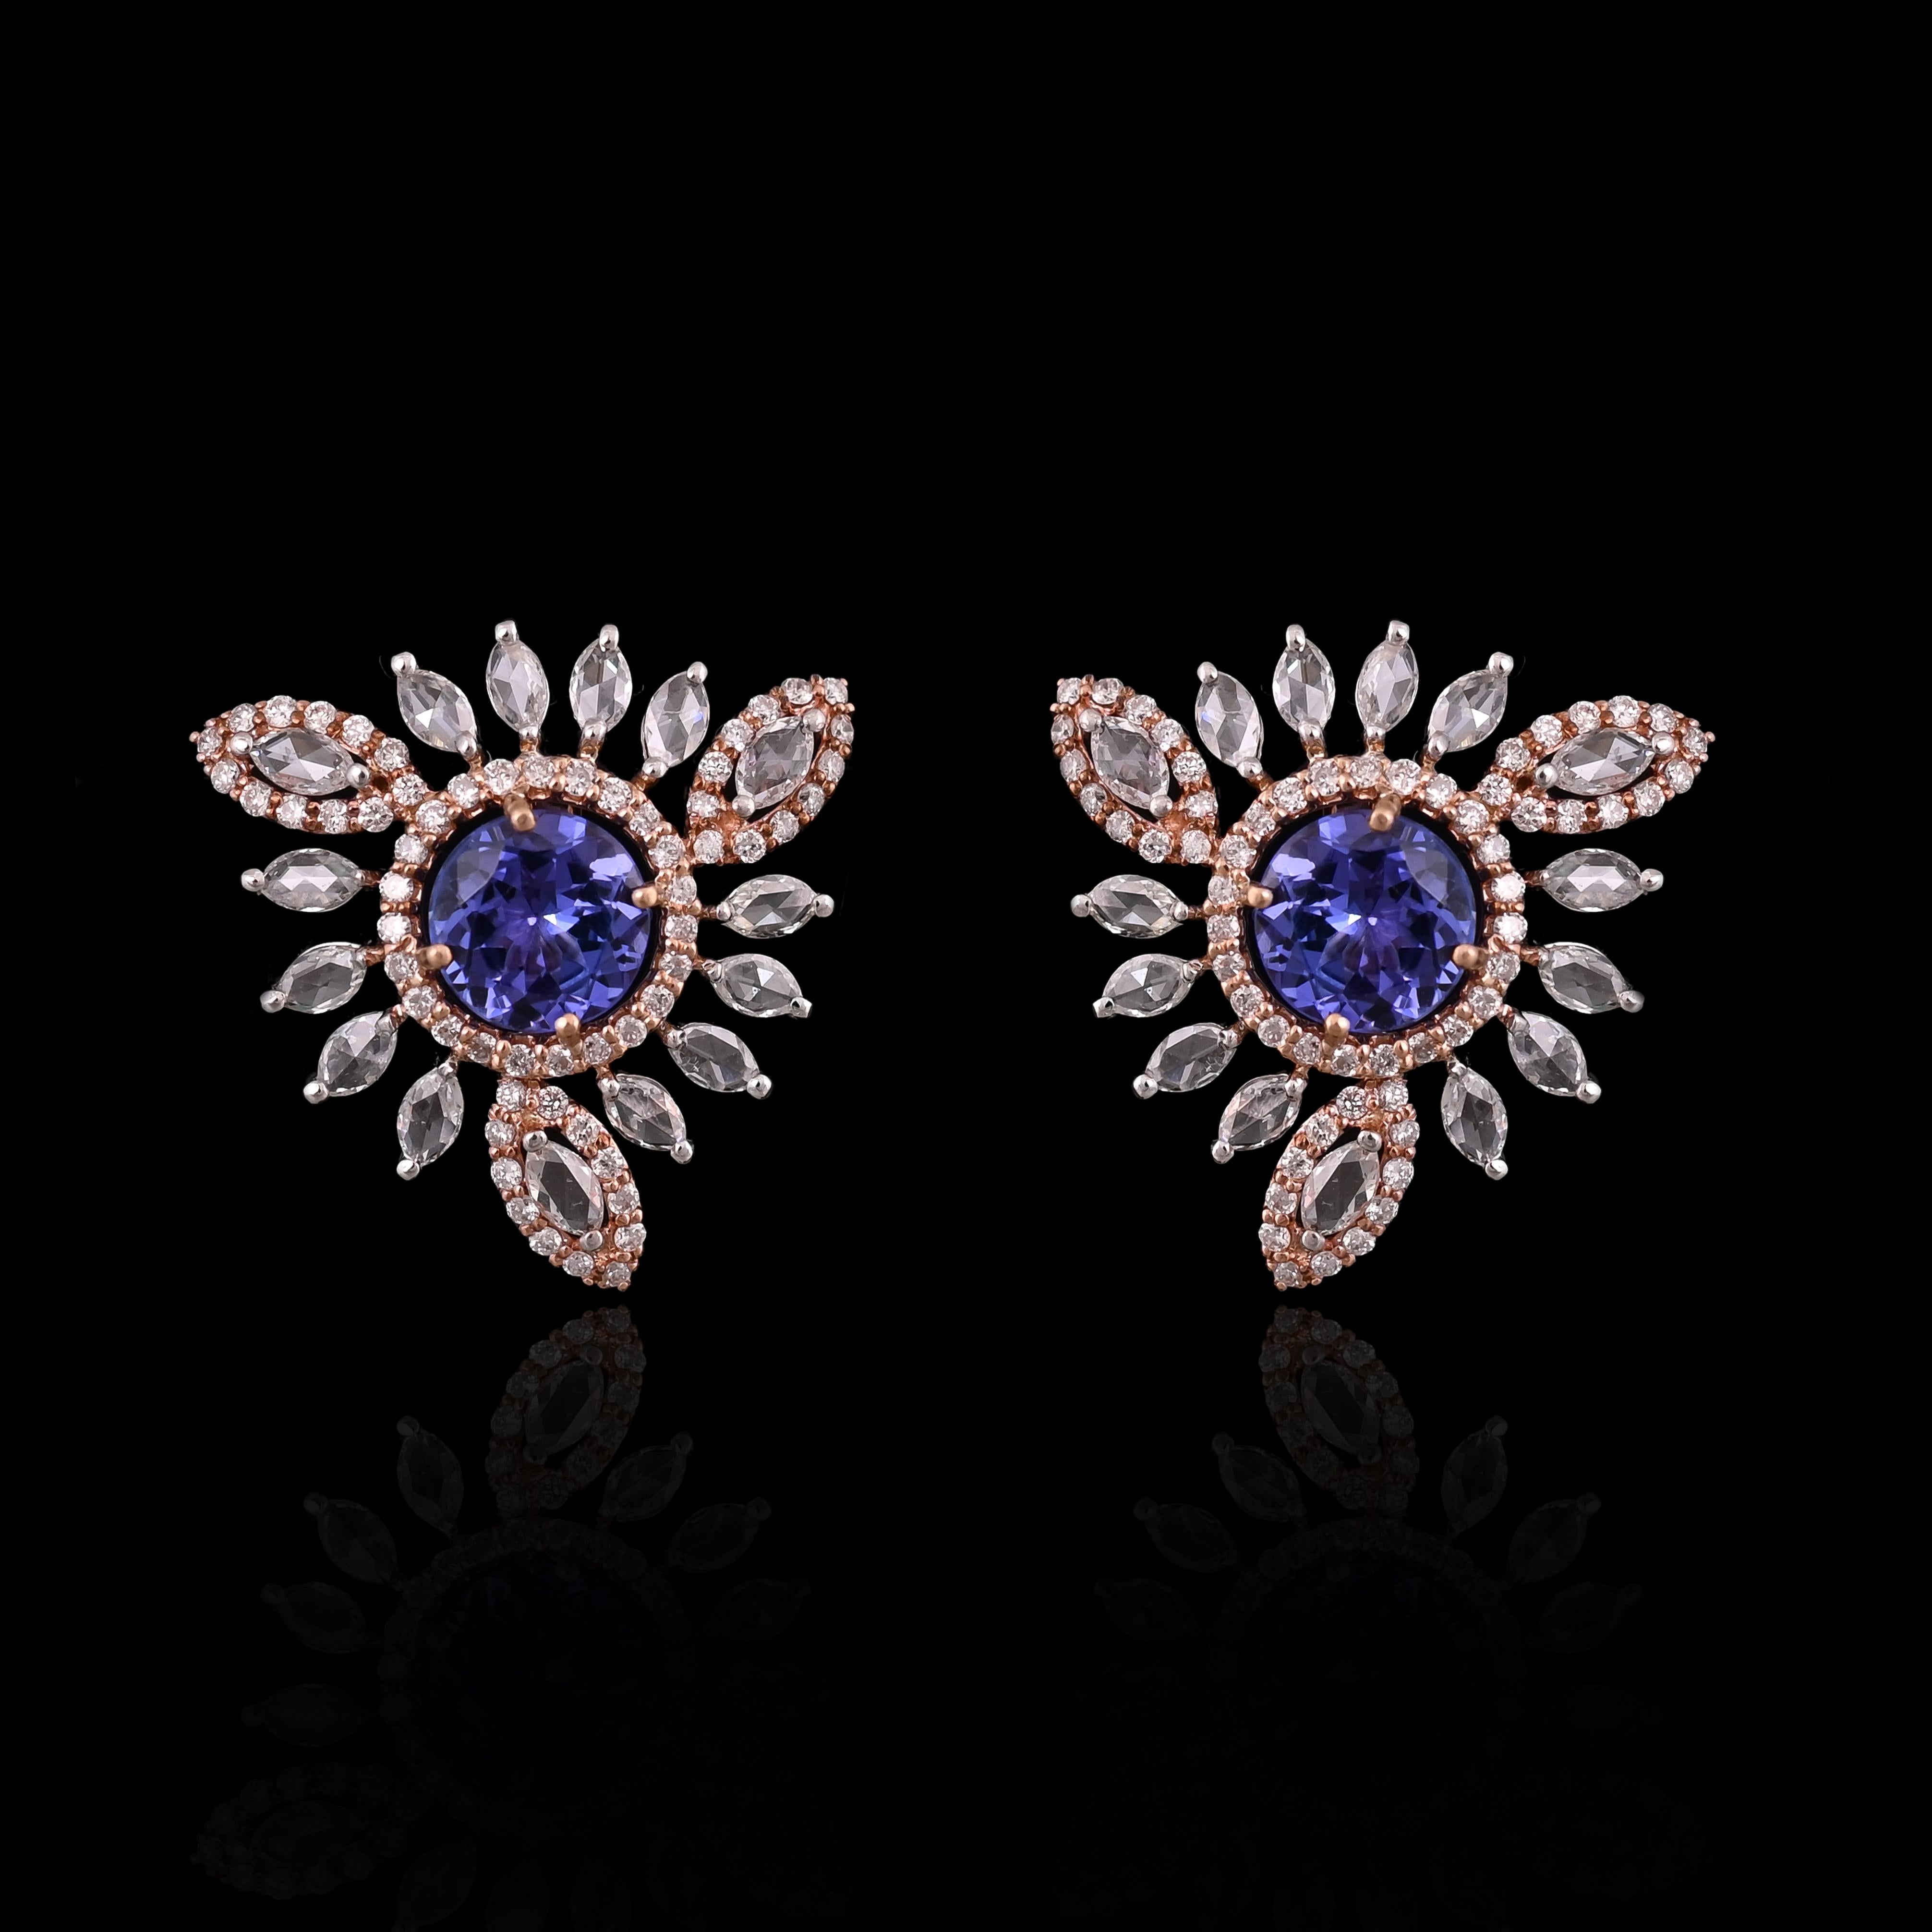 A very gorgeous and beautiful, modern styles Tanzanite Stud Earrings set in 18K White & Rose Gold & Diamonds. The weight of the Tanzanite rounds is 2.24 carats. The Tanzanites are responsibly sourced from Tanzania. The weight of the Rose Cut